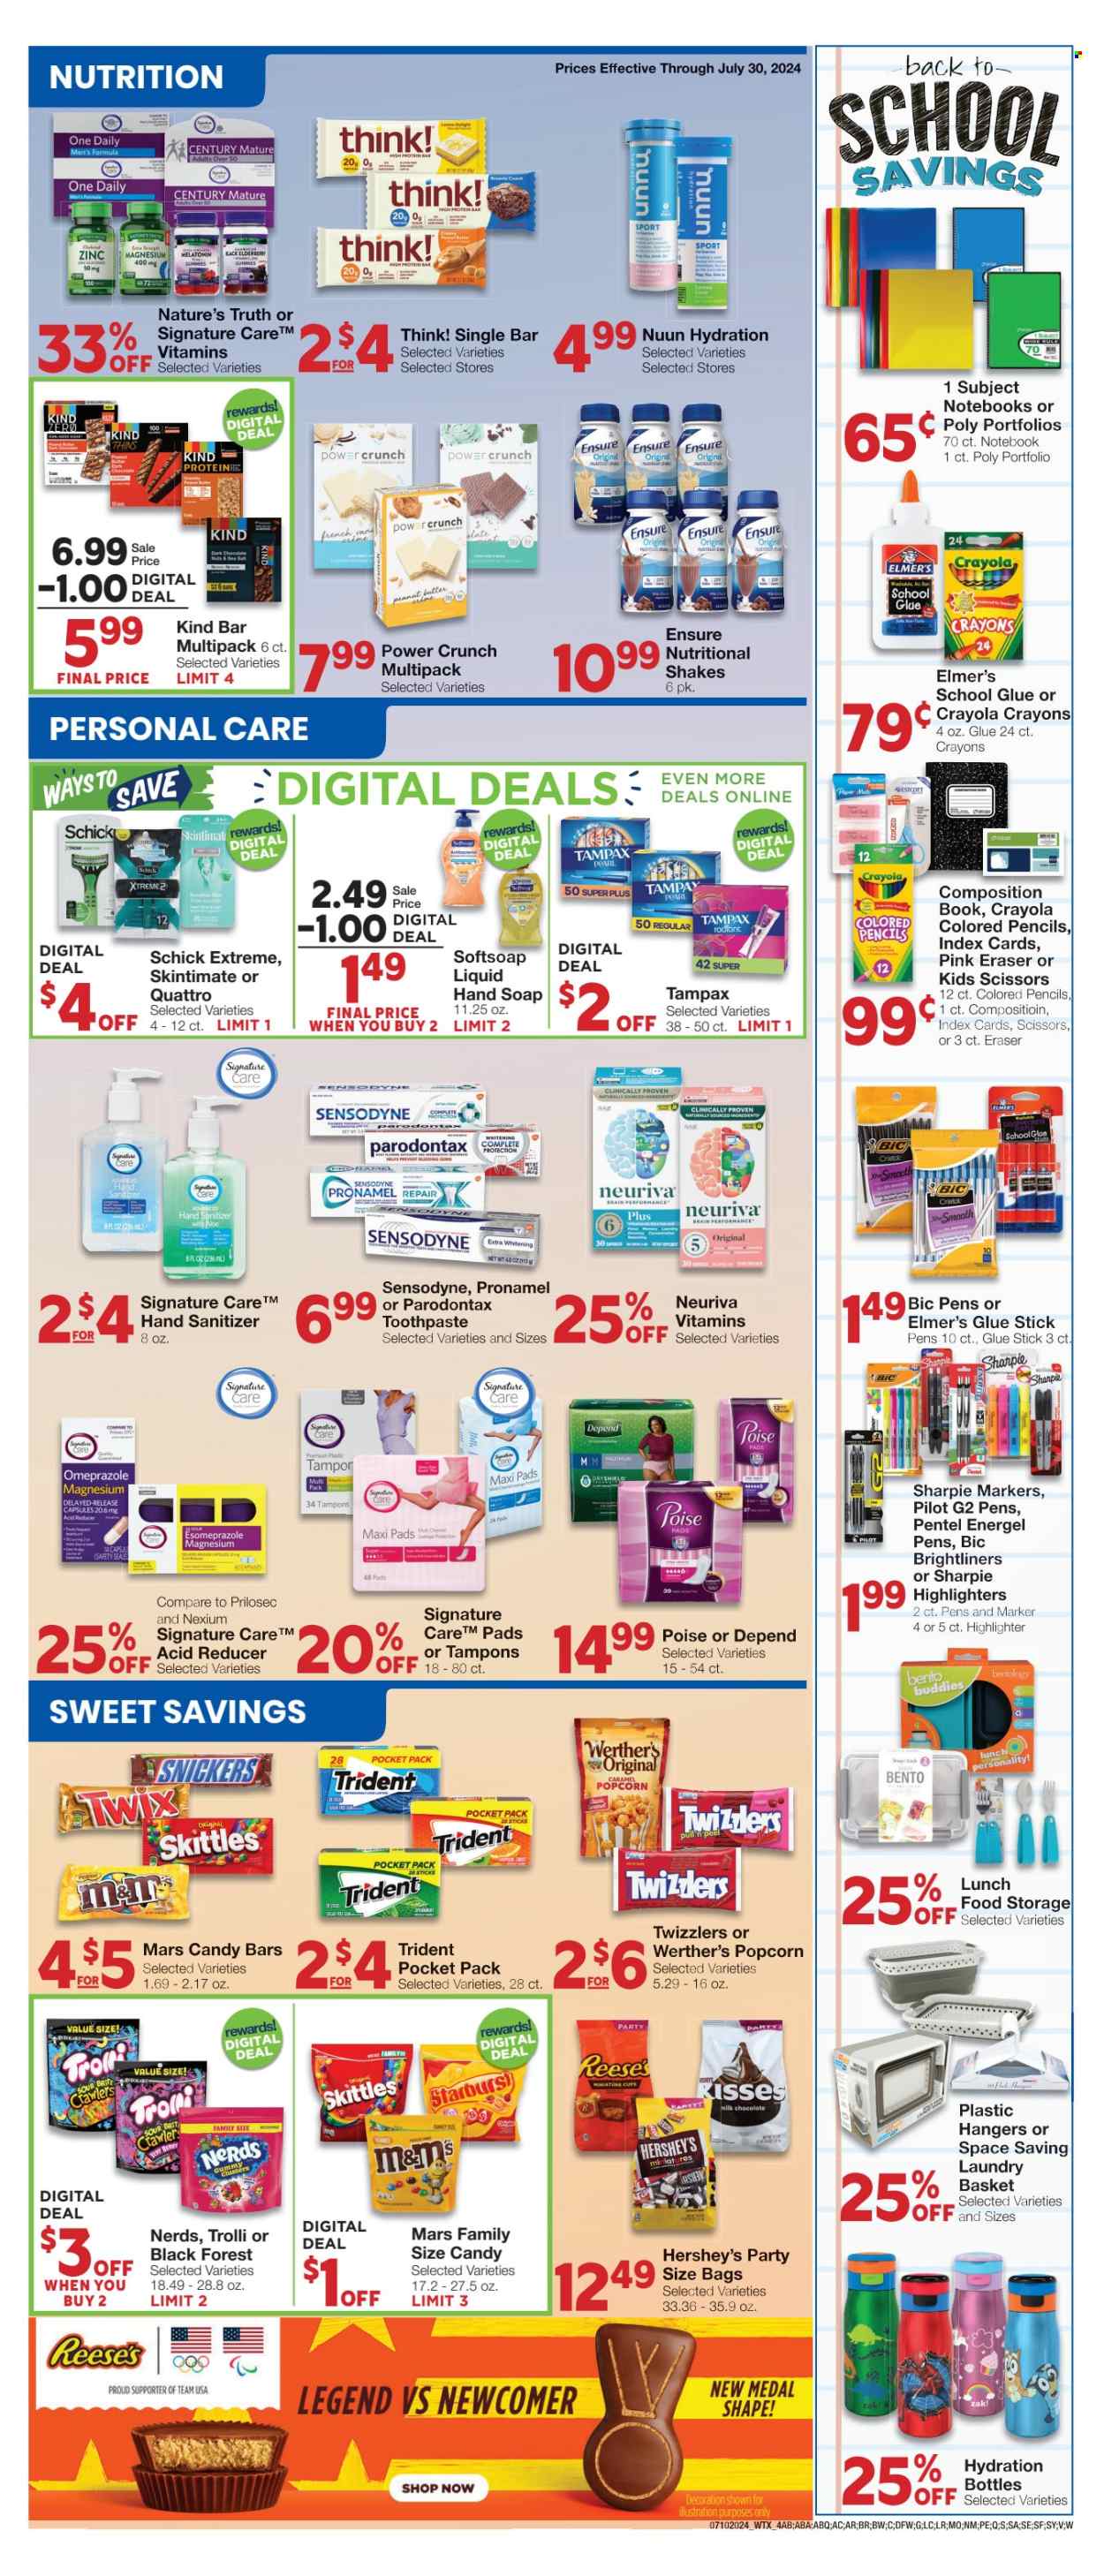 thumbnail - Market Street Flyer - 07/24/2024 - 07/30/2024 - Sales products - shake, probiotic drink, Reese's, Hershey's, milk chocolate, Trolli, Snickers, Twix, Mars, M&M's, Skittles, Trident, Starburst, candy bar, Werther's Original, sweets, bars, lollies, popcorn, protein bar, nut bar, pads, Softsoap, hand soap, toothpaste, Sensodyne, Parodontax, Tampax, sanitary pads, tampons, Poise, Schick, hand sanitizer, drink bottle, meal box, magnesium, Melatonin, Nature's Truth, Nexium, zinc, nutritional supplement, one daily, dietary supplement, acid blocker, vitamins, highlighters. Page 6.